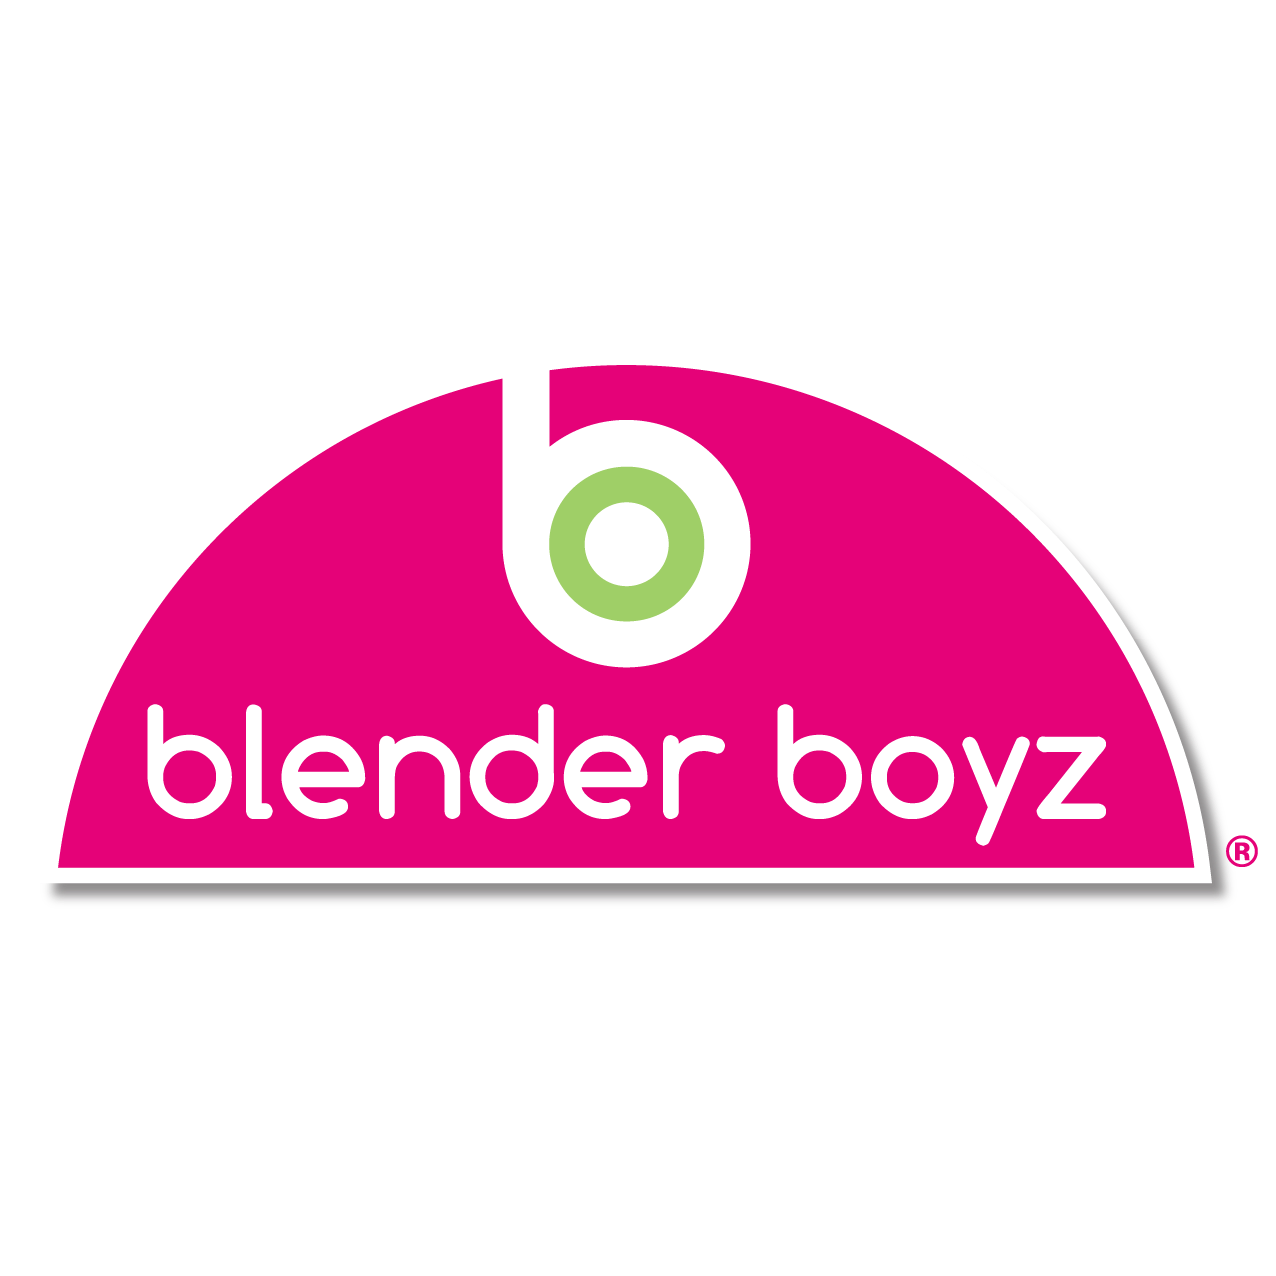 Single serve blender drinks to make at home. Ice Cappuccinos, Smoothies, Cocktail mixes. Order now at https://t.co/sITwxX87zF, https://t.co/YsFtMFDRea or https://t.co/ER9T8zf14P(US)